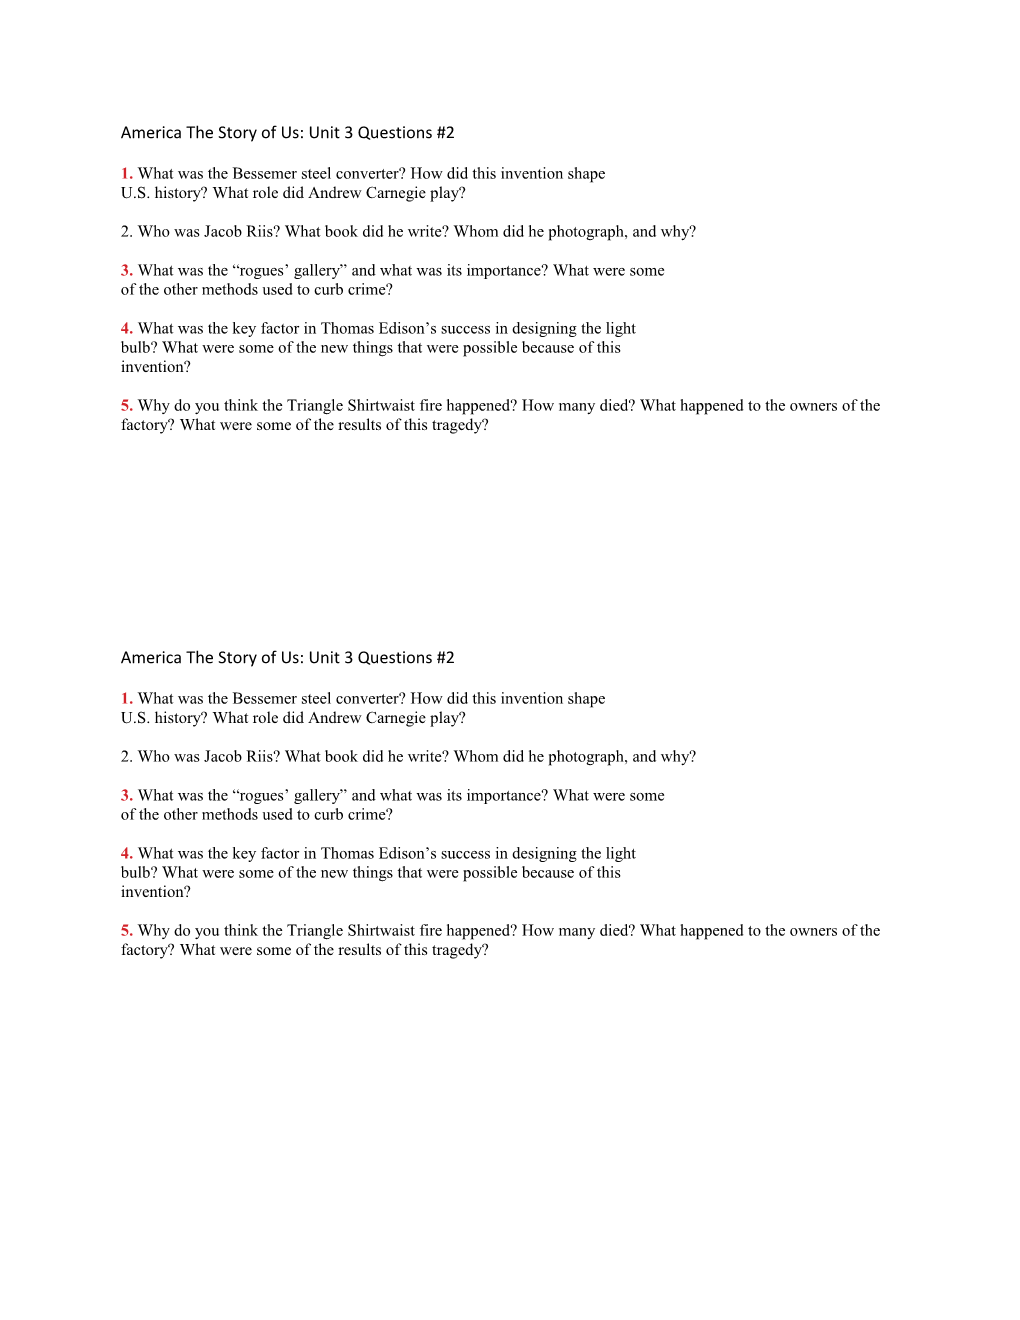 America the Story of Us: Unit 3 Questions #2